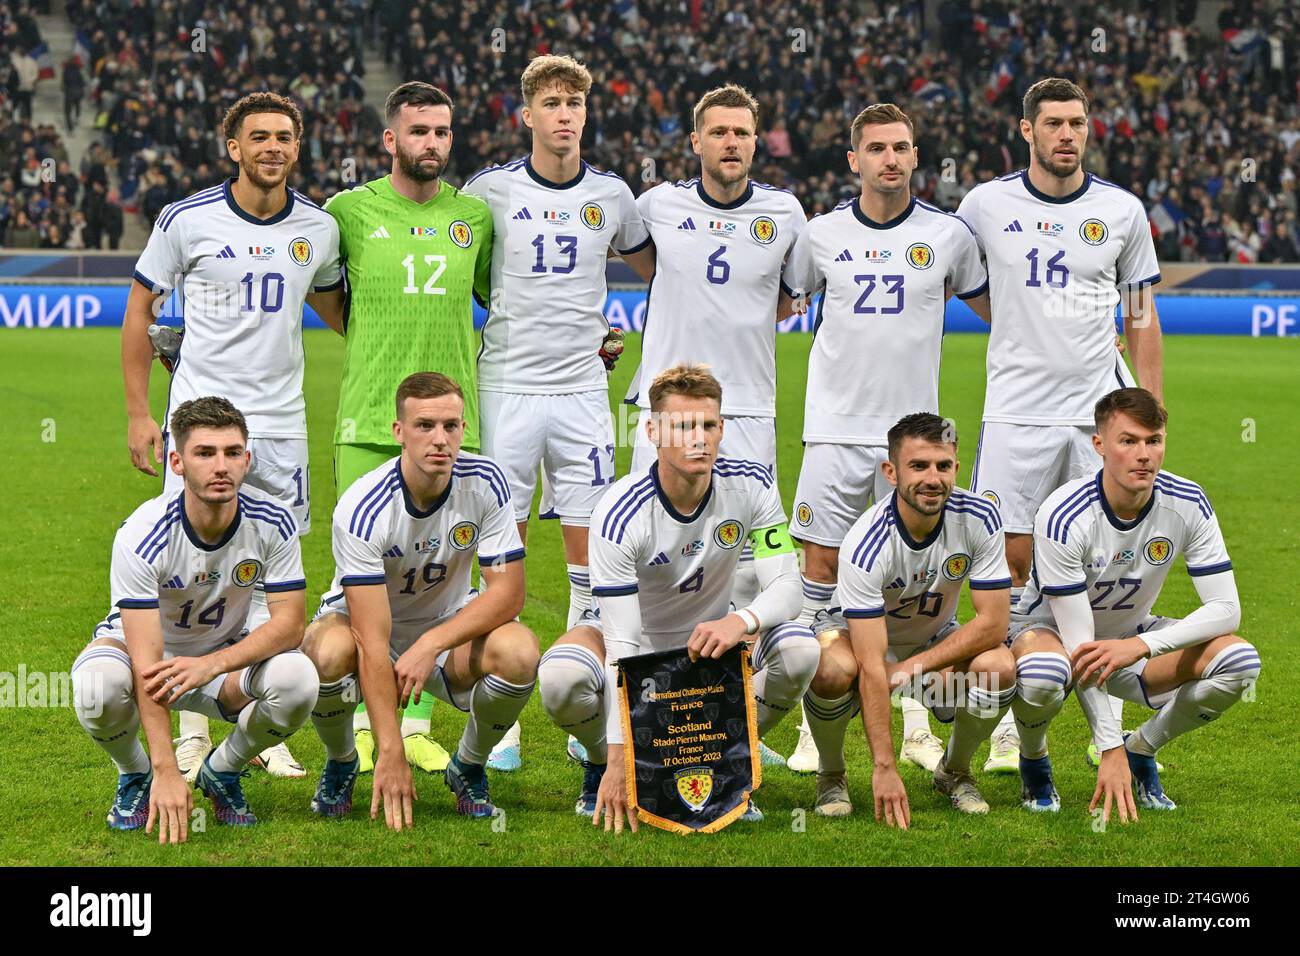 players of Scotland with Che Adams (10) of Scotland, goalkeeper Liam Kelly (12) of Scotland, Jack Hendry (13) of Scotland, Liam Cooper (6) of Scotland, Kenny McLean (23) of Scotland, Scott McKenna (16) of Scotland, Billy Gilmour (14) of Scotland, Lewis Ferguson (19) of Scotland, Scott McTominay (4) of Scotland, Greg Taylor (20) of Scotland and Nathan Patterson (22) of Scotland pose for a team photo during a soccer game between the national teams of France and Scotland in friendly game, on October 17, 2023 in Lille, France. (Photo by David Catry/Sportpix) Stock Photo